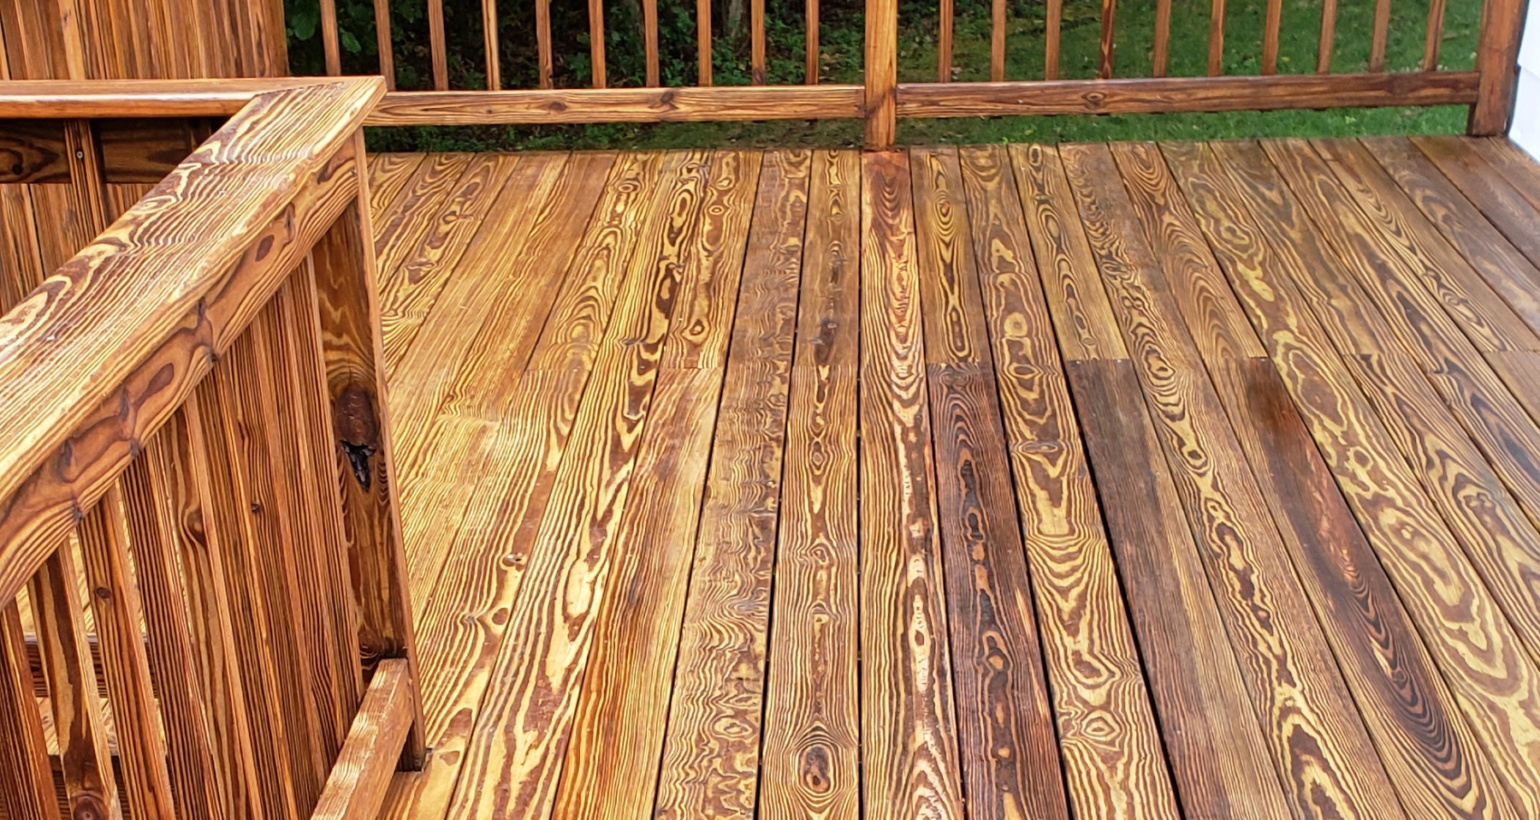 How does the stain affect the look of the deck?